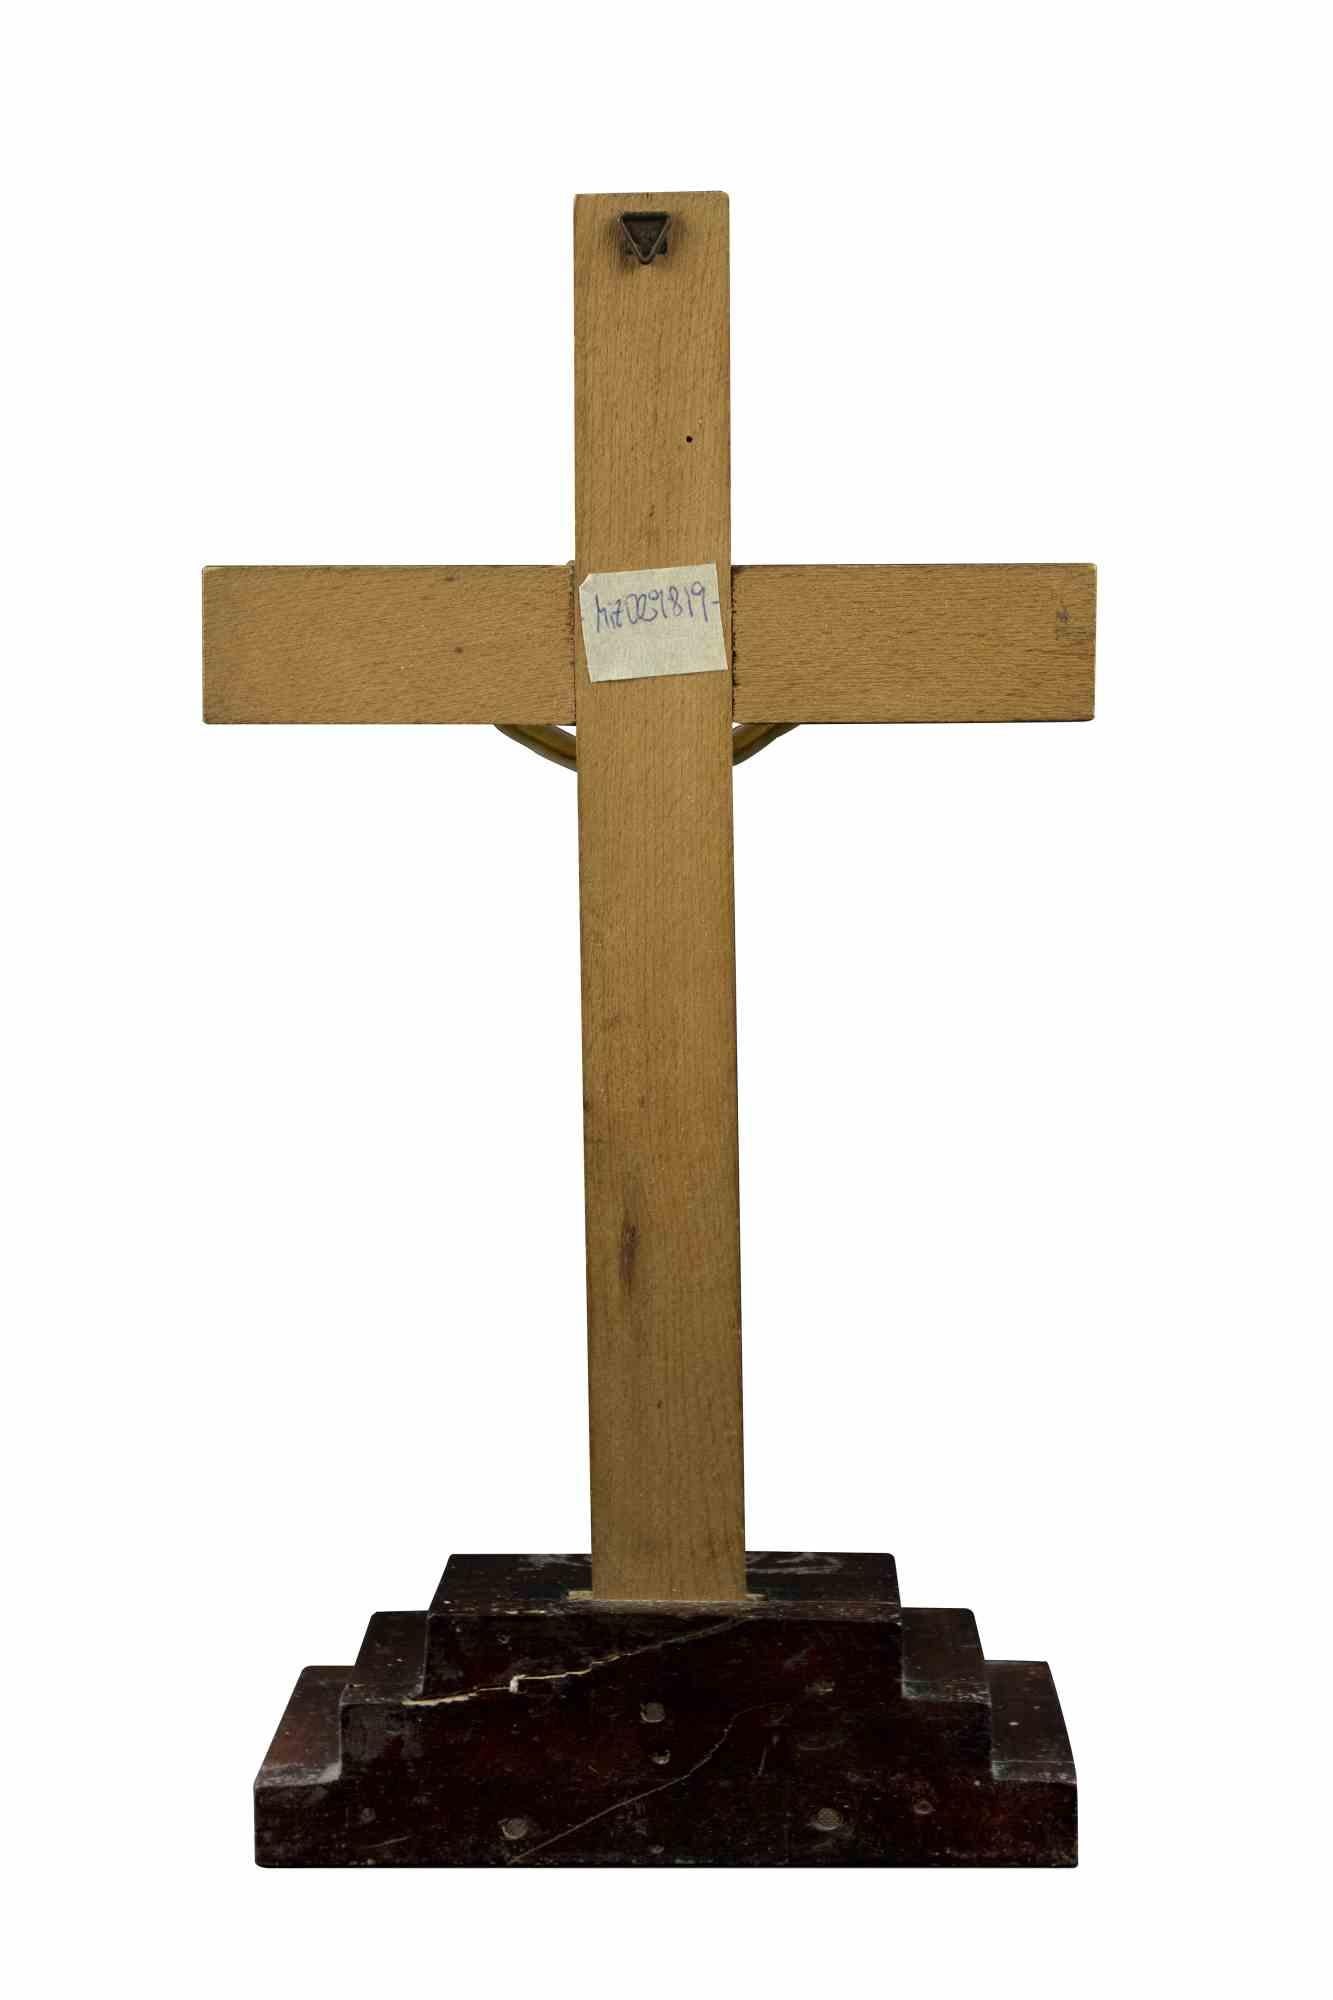 The Crucifixion is a decorative object realized in 1980s.

Wood cricified Christ.